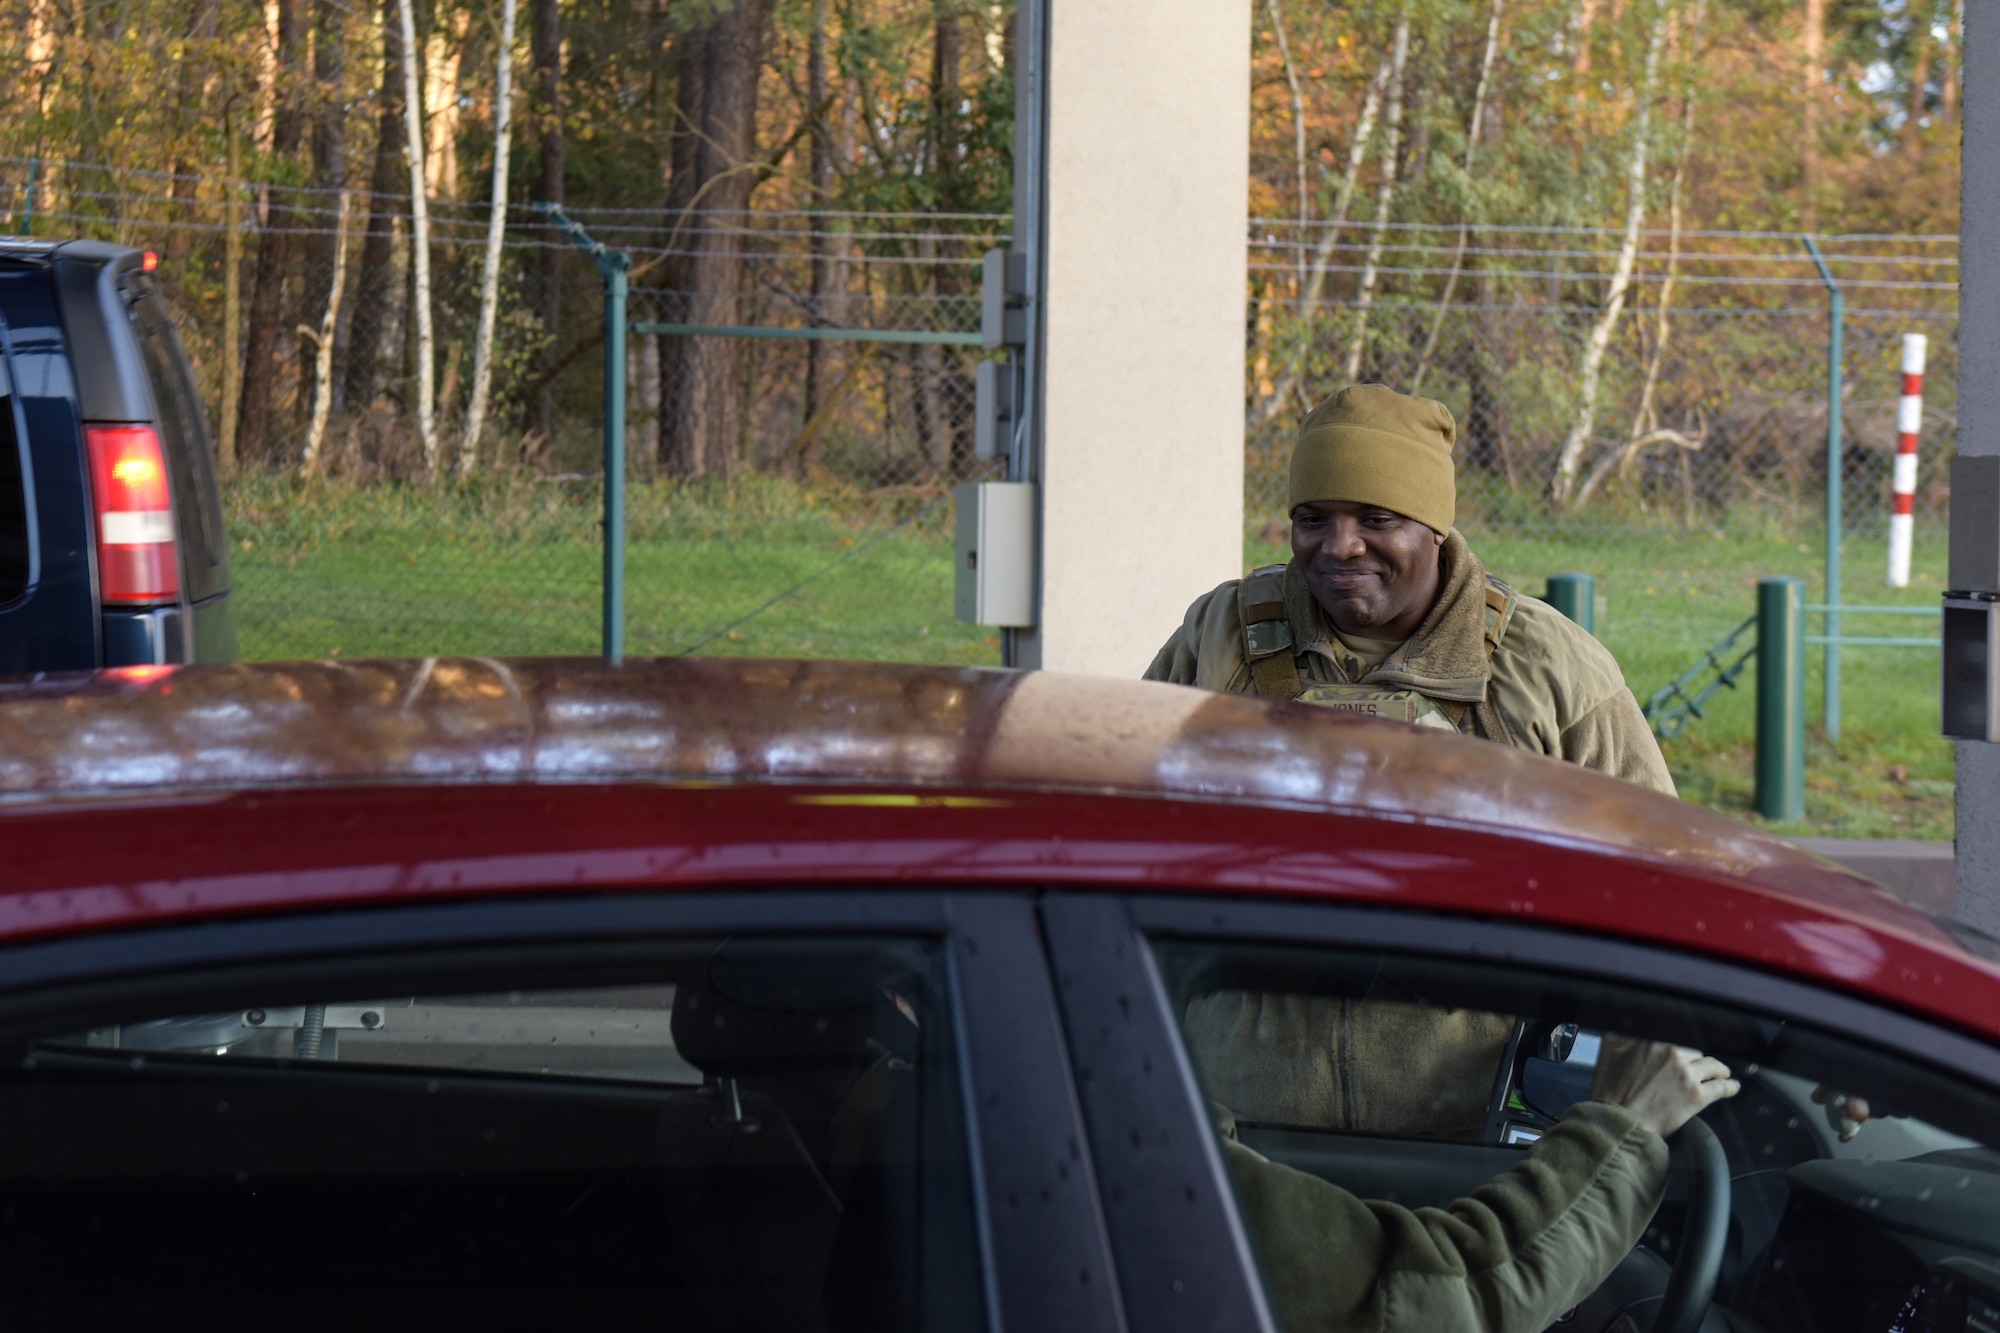 Man smiles to a person inside of a car